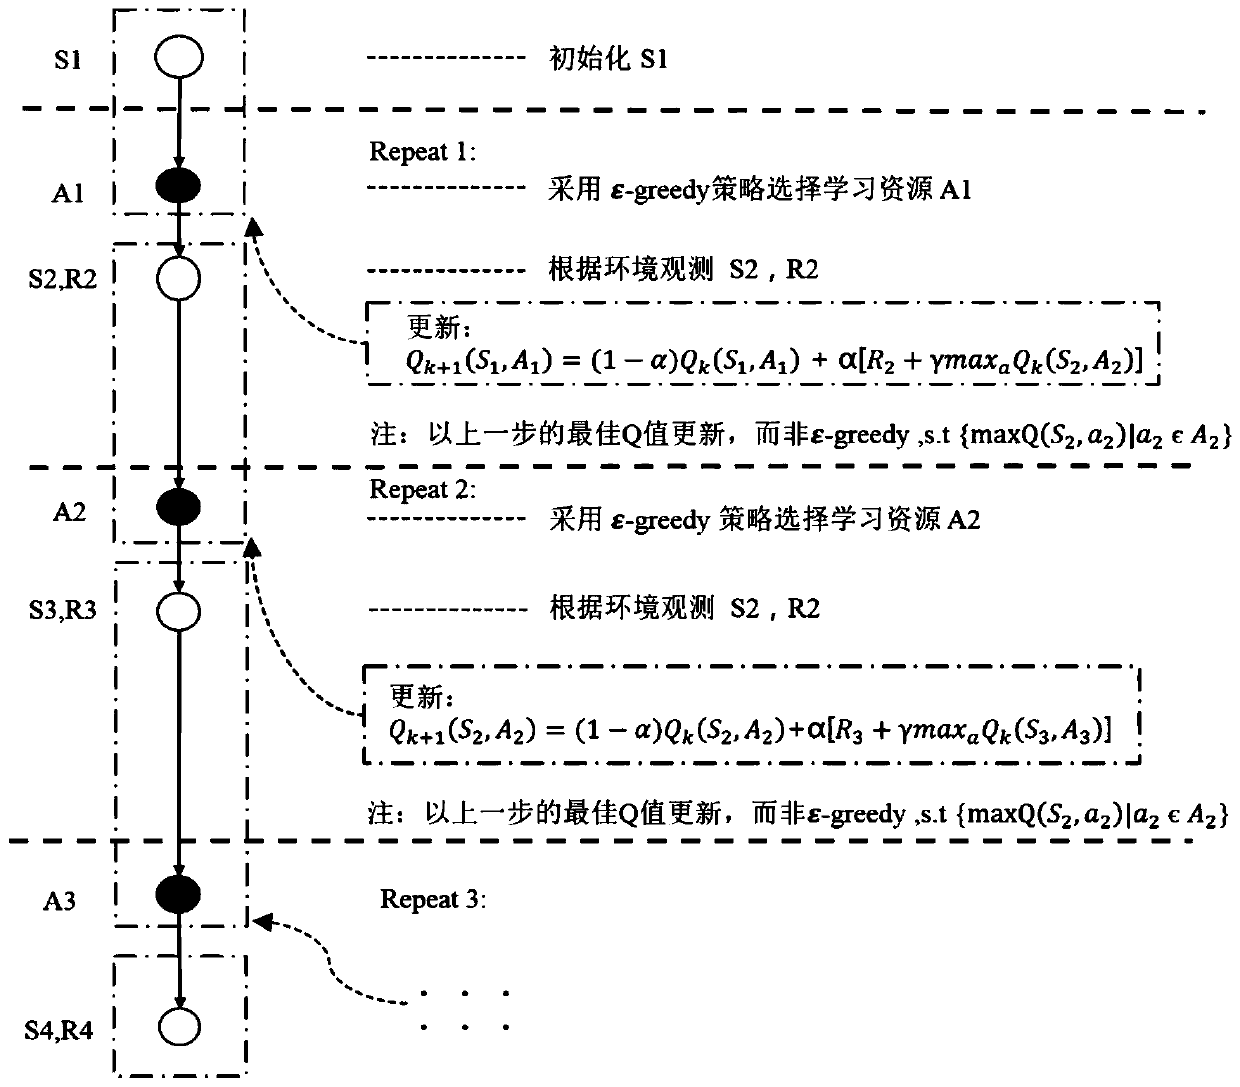 Adaptive learning path planning system based on reinforcement learning